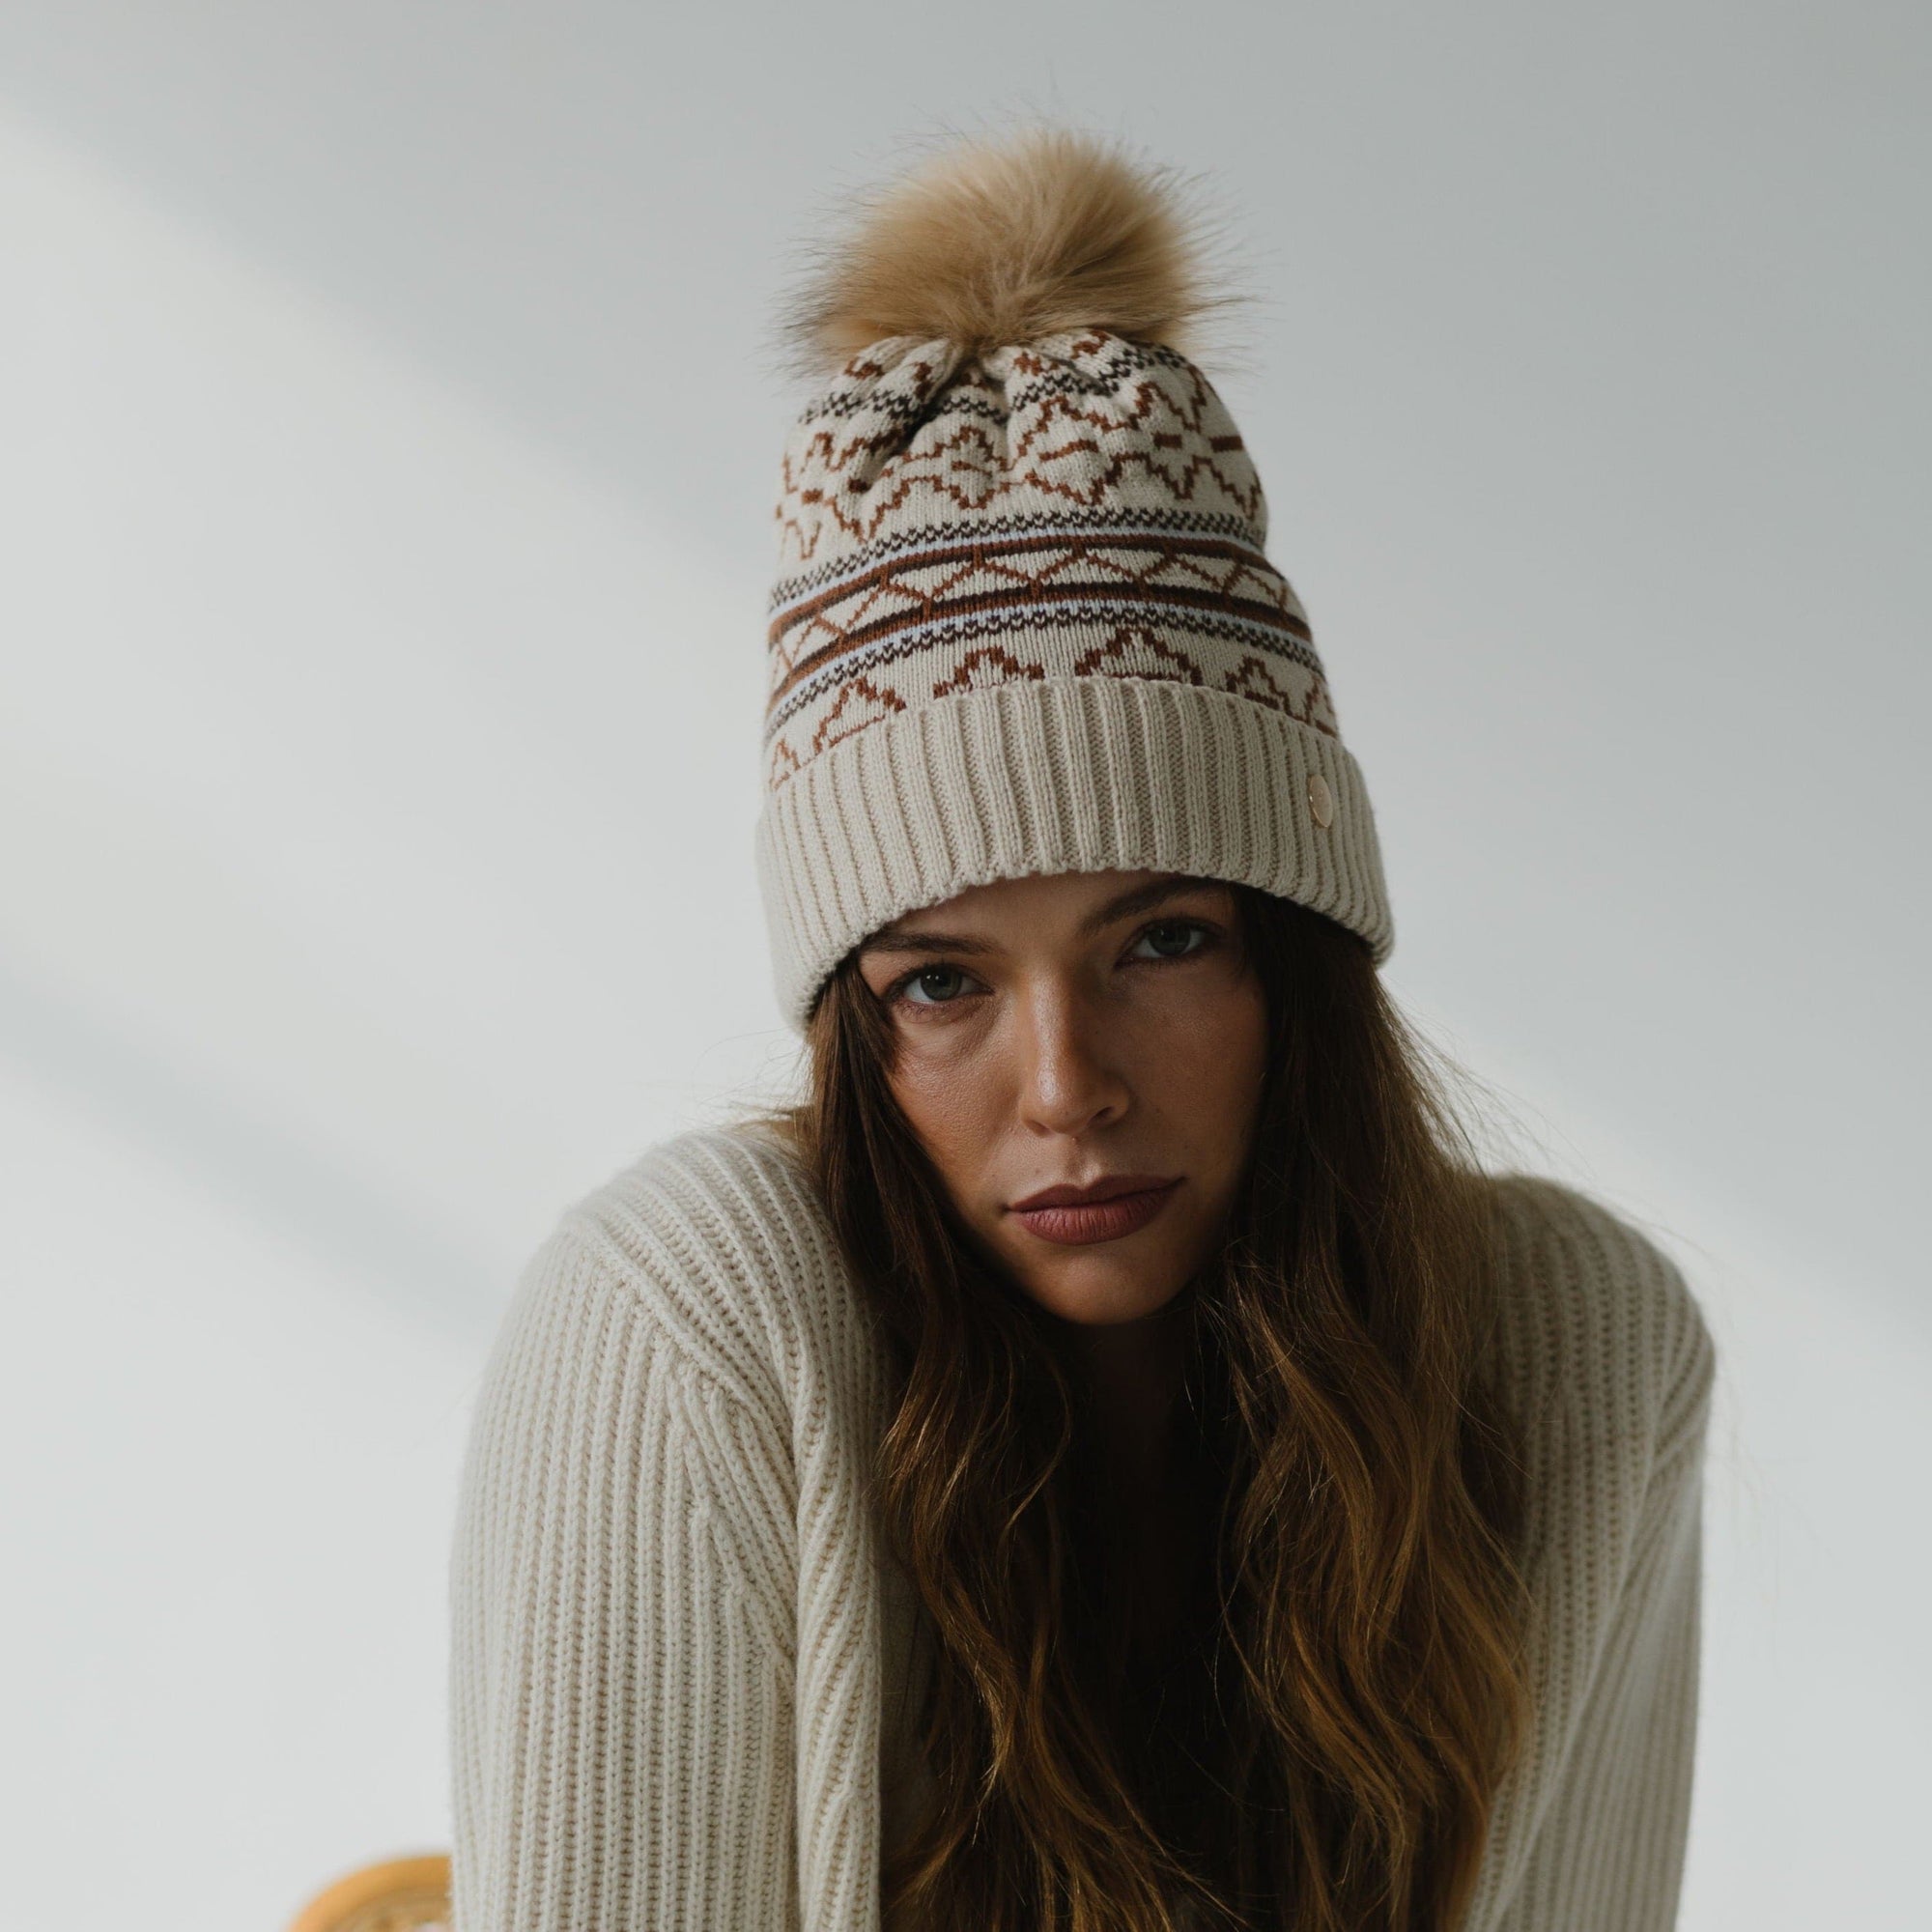 Gigi Pip beanies for women - Aspen Knit Print Beanie - 100% polyester relaxed fit beanie with a knit print and features a pom pom on the top